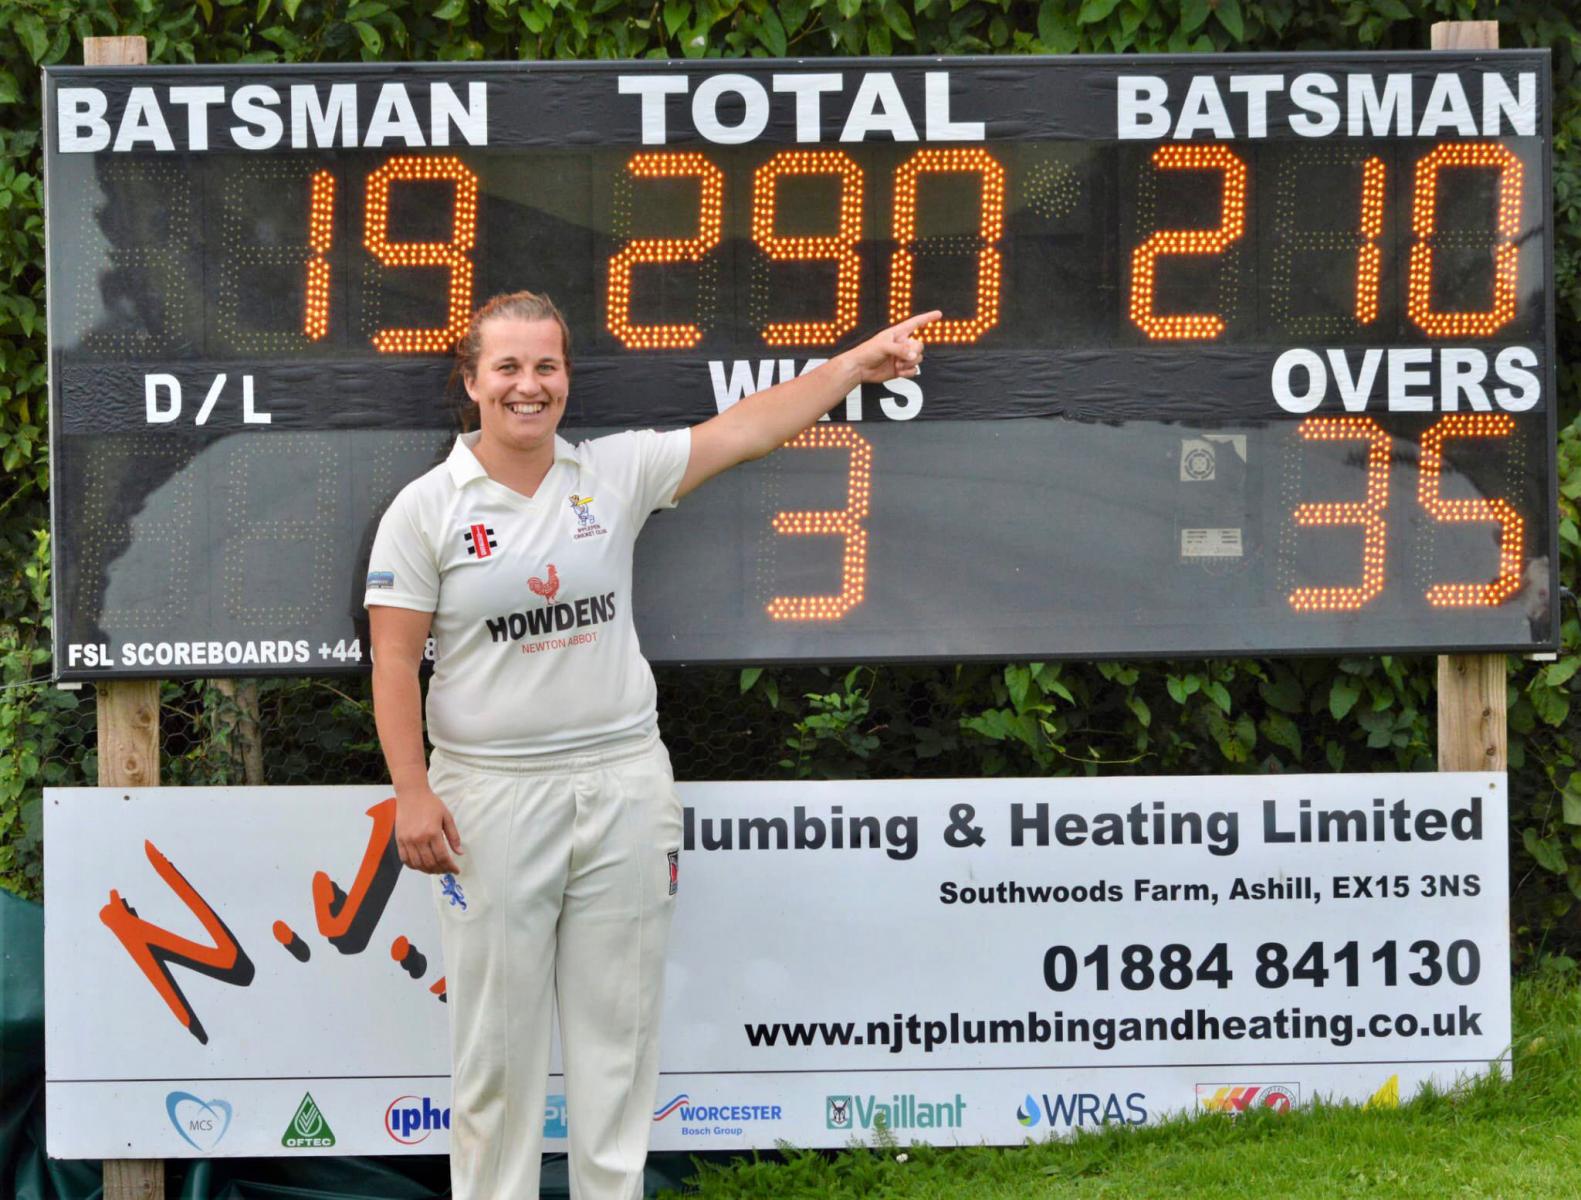 Ipplepen's Lydia Harris in front of the scoreboard showing her double hundred